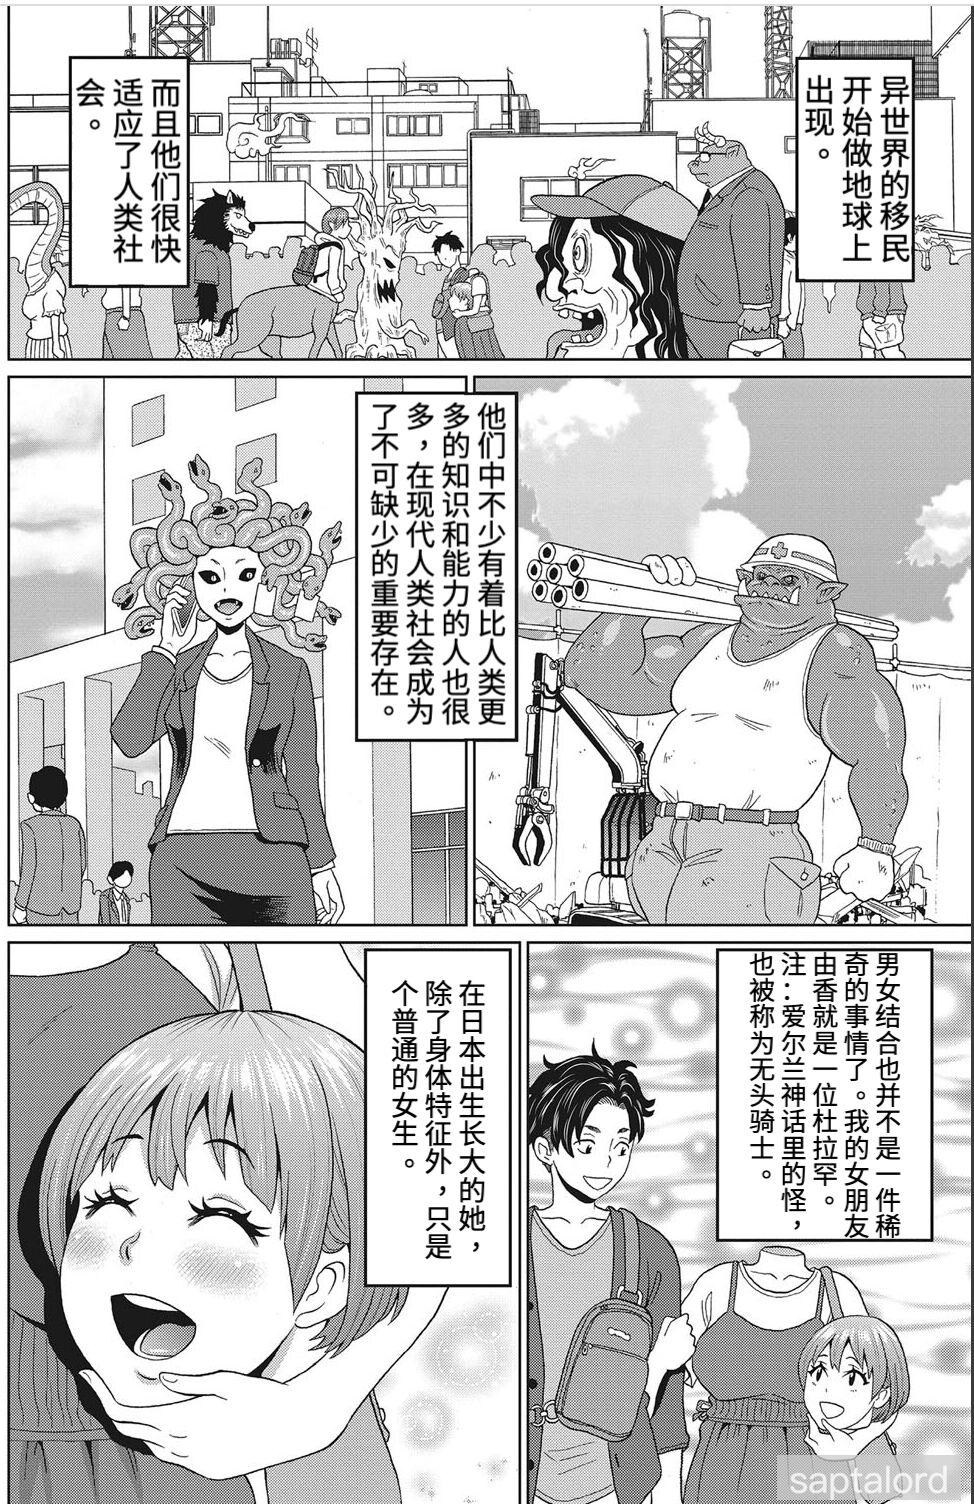 Small 我的断头女友 Officesex - Page 2